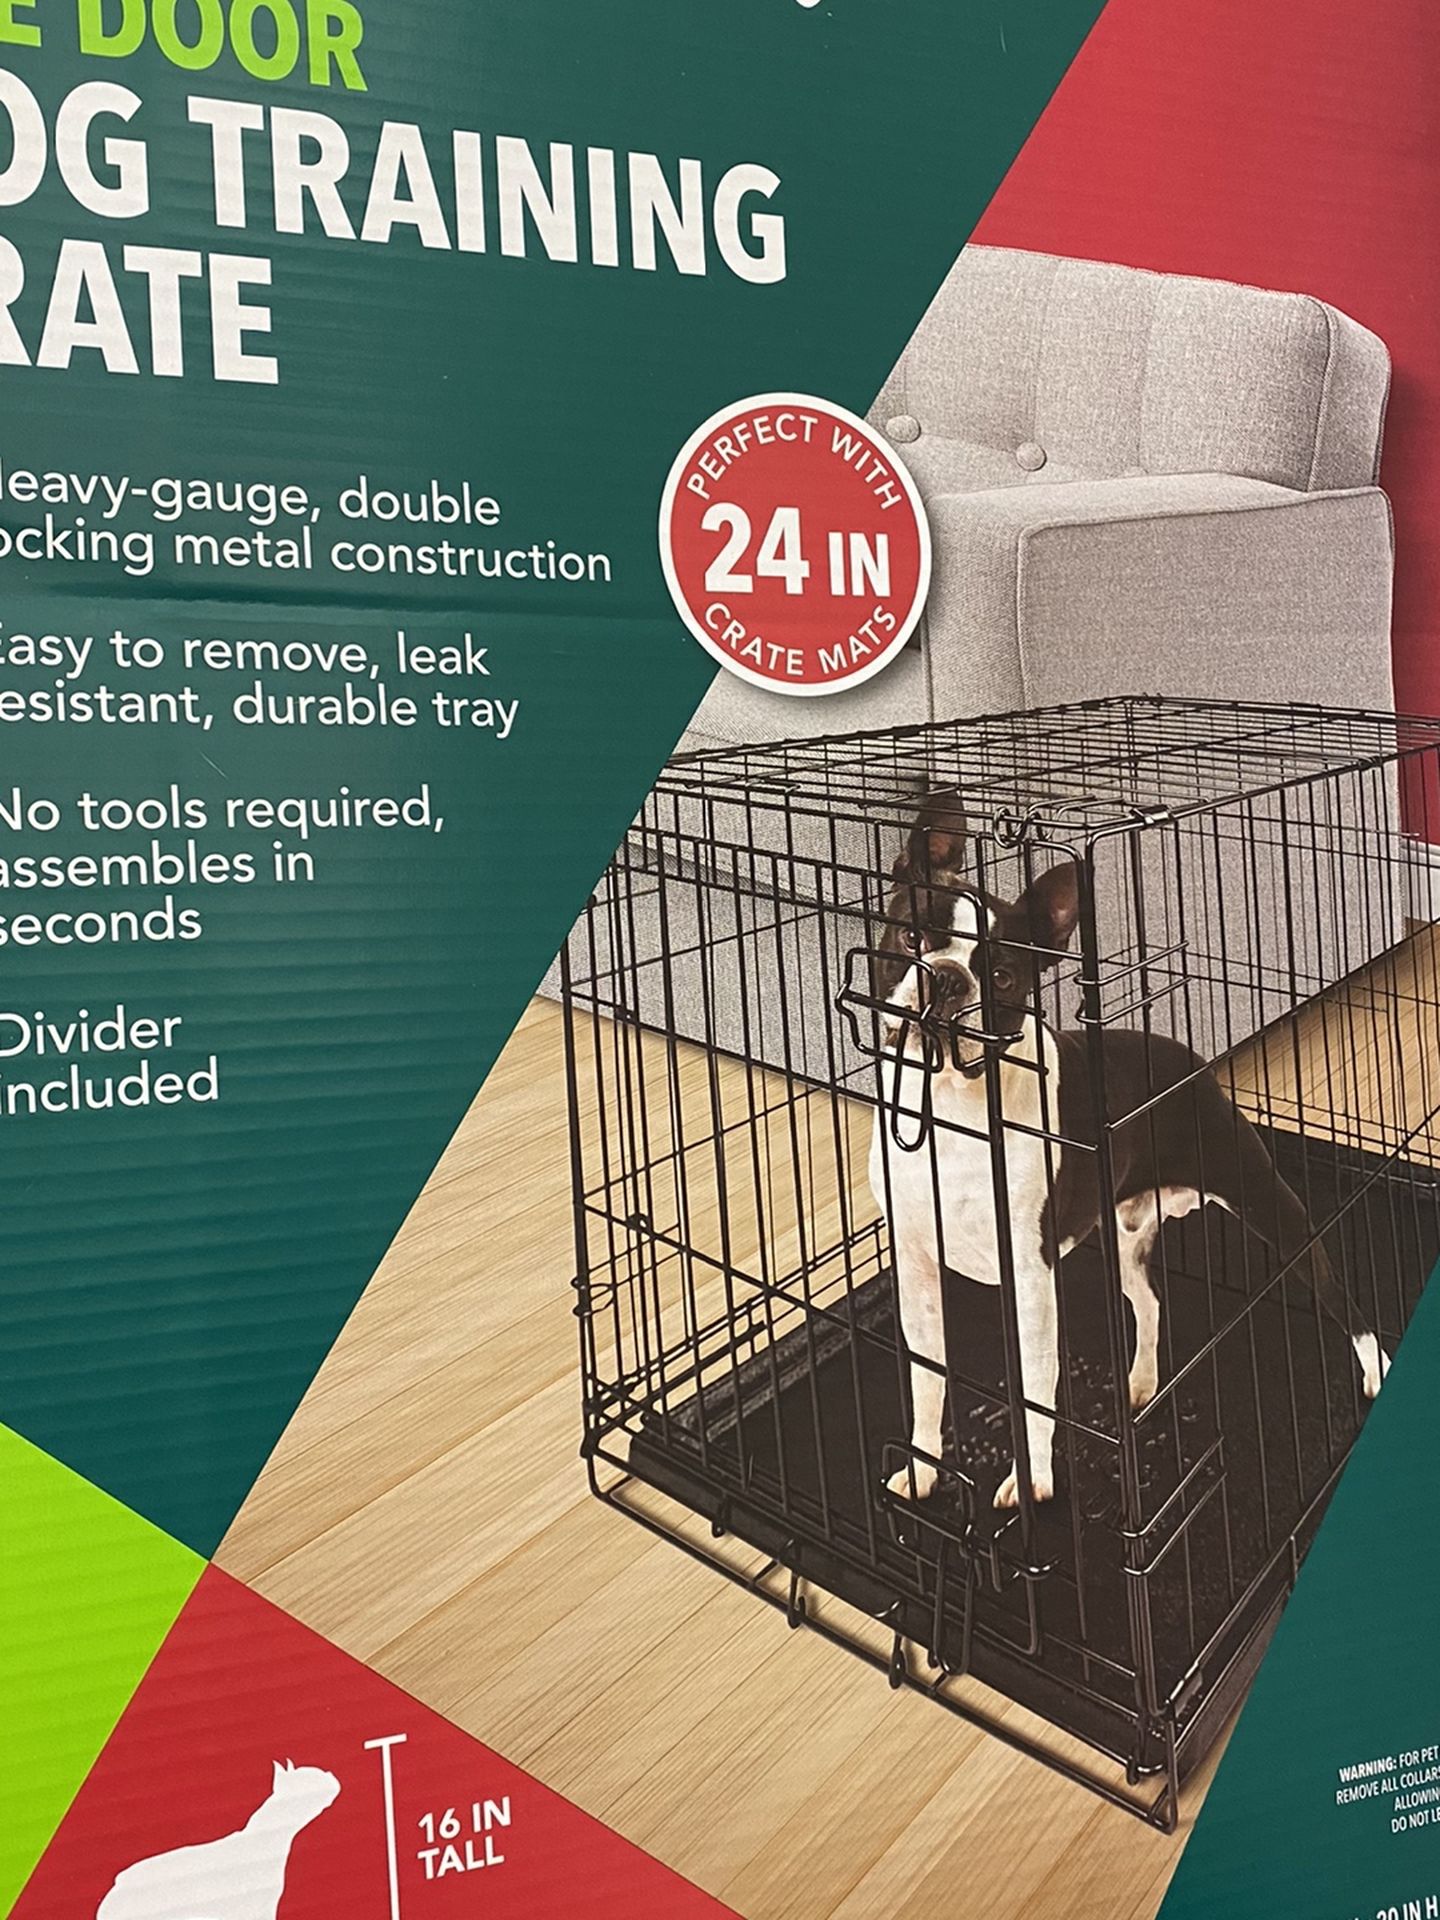 New Never Open Dog Crate Small